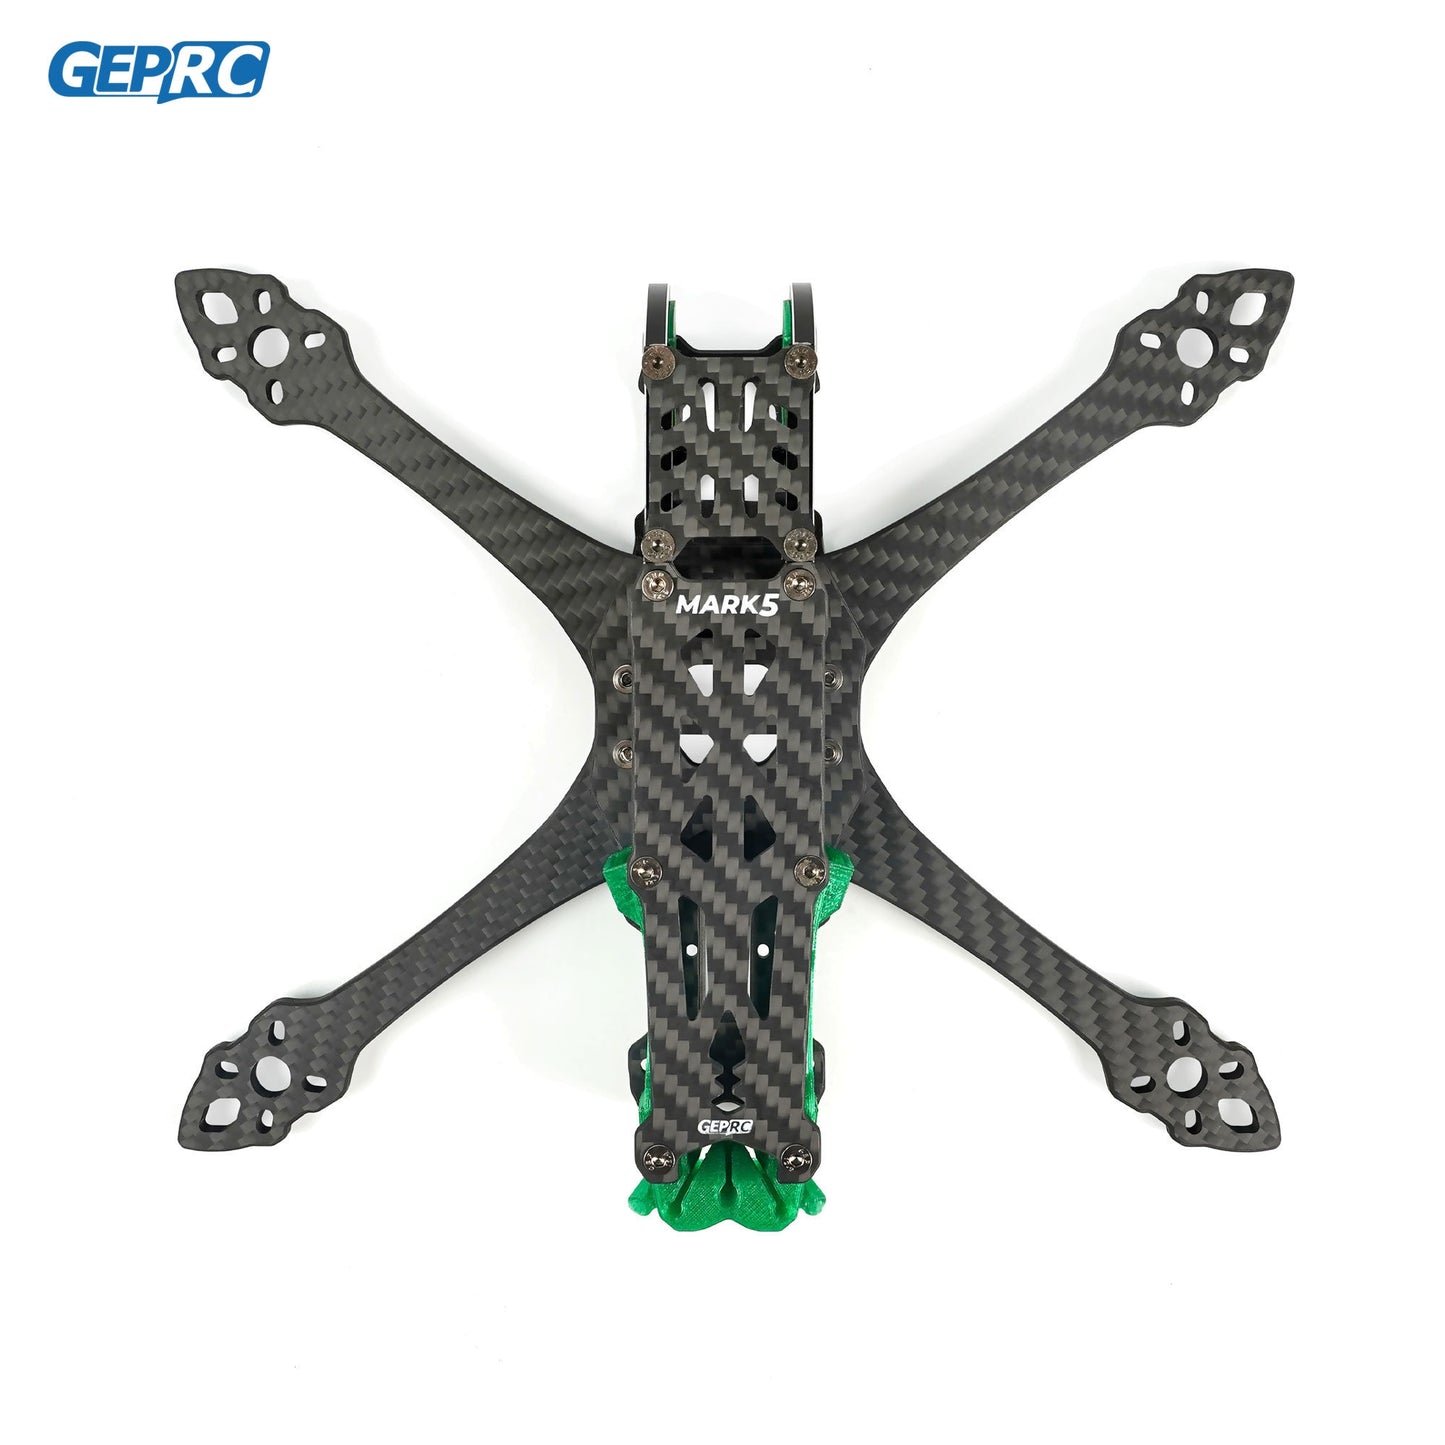 GEP-MK5 O3 Frame X Version Frame Parts Propeller Accessory - Base Quadcopter Frame FPV Freestyle RC Racing Drone Mark5